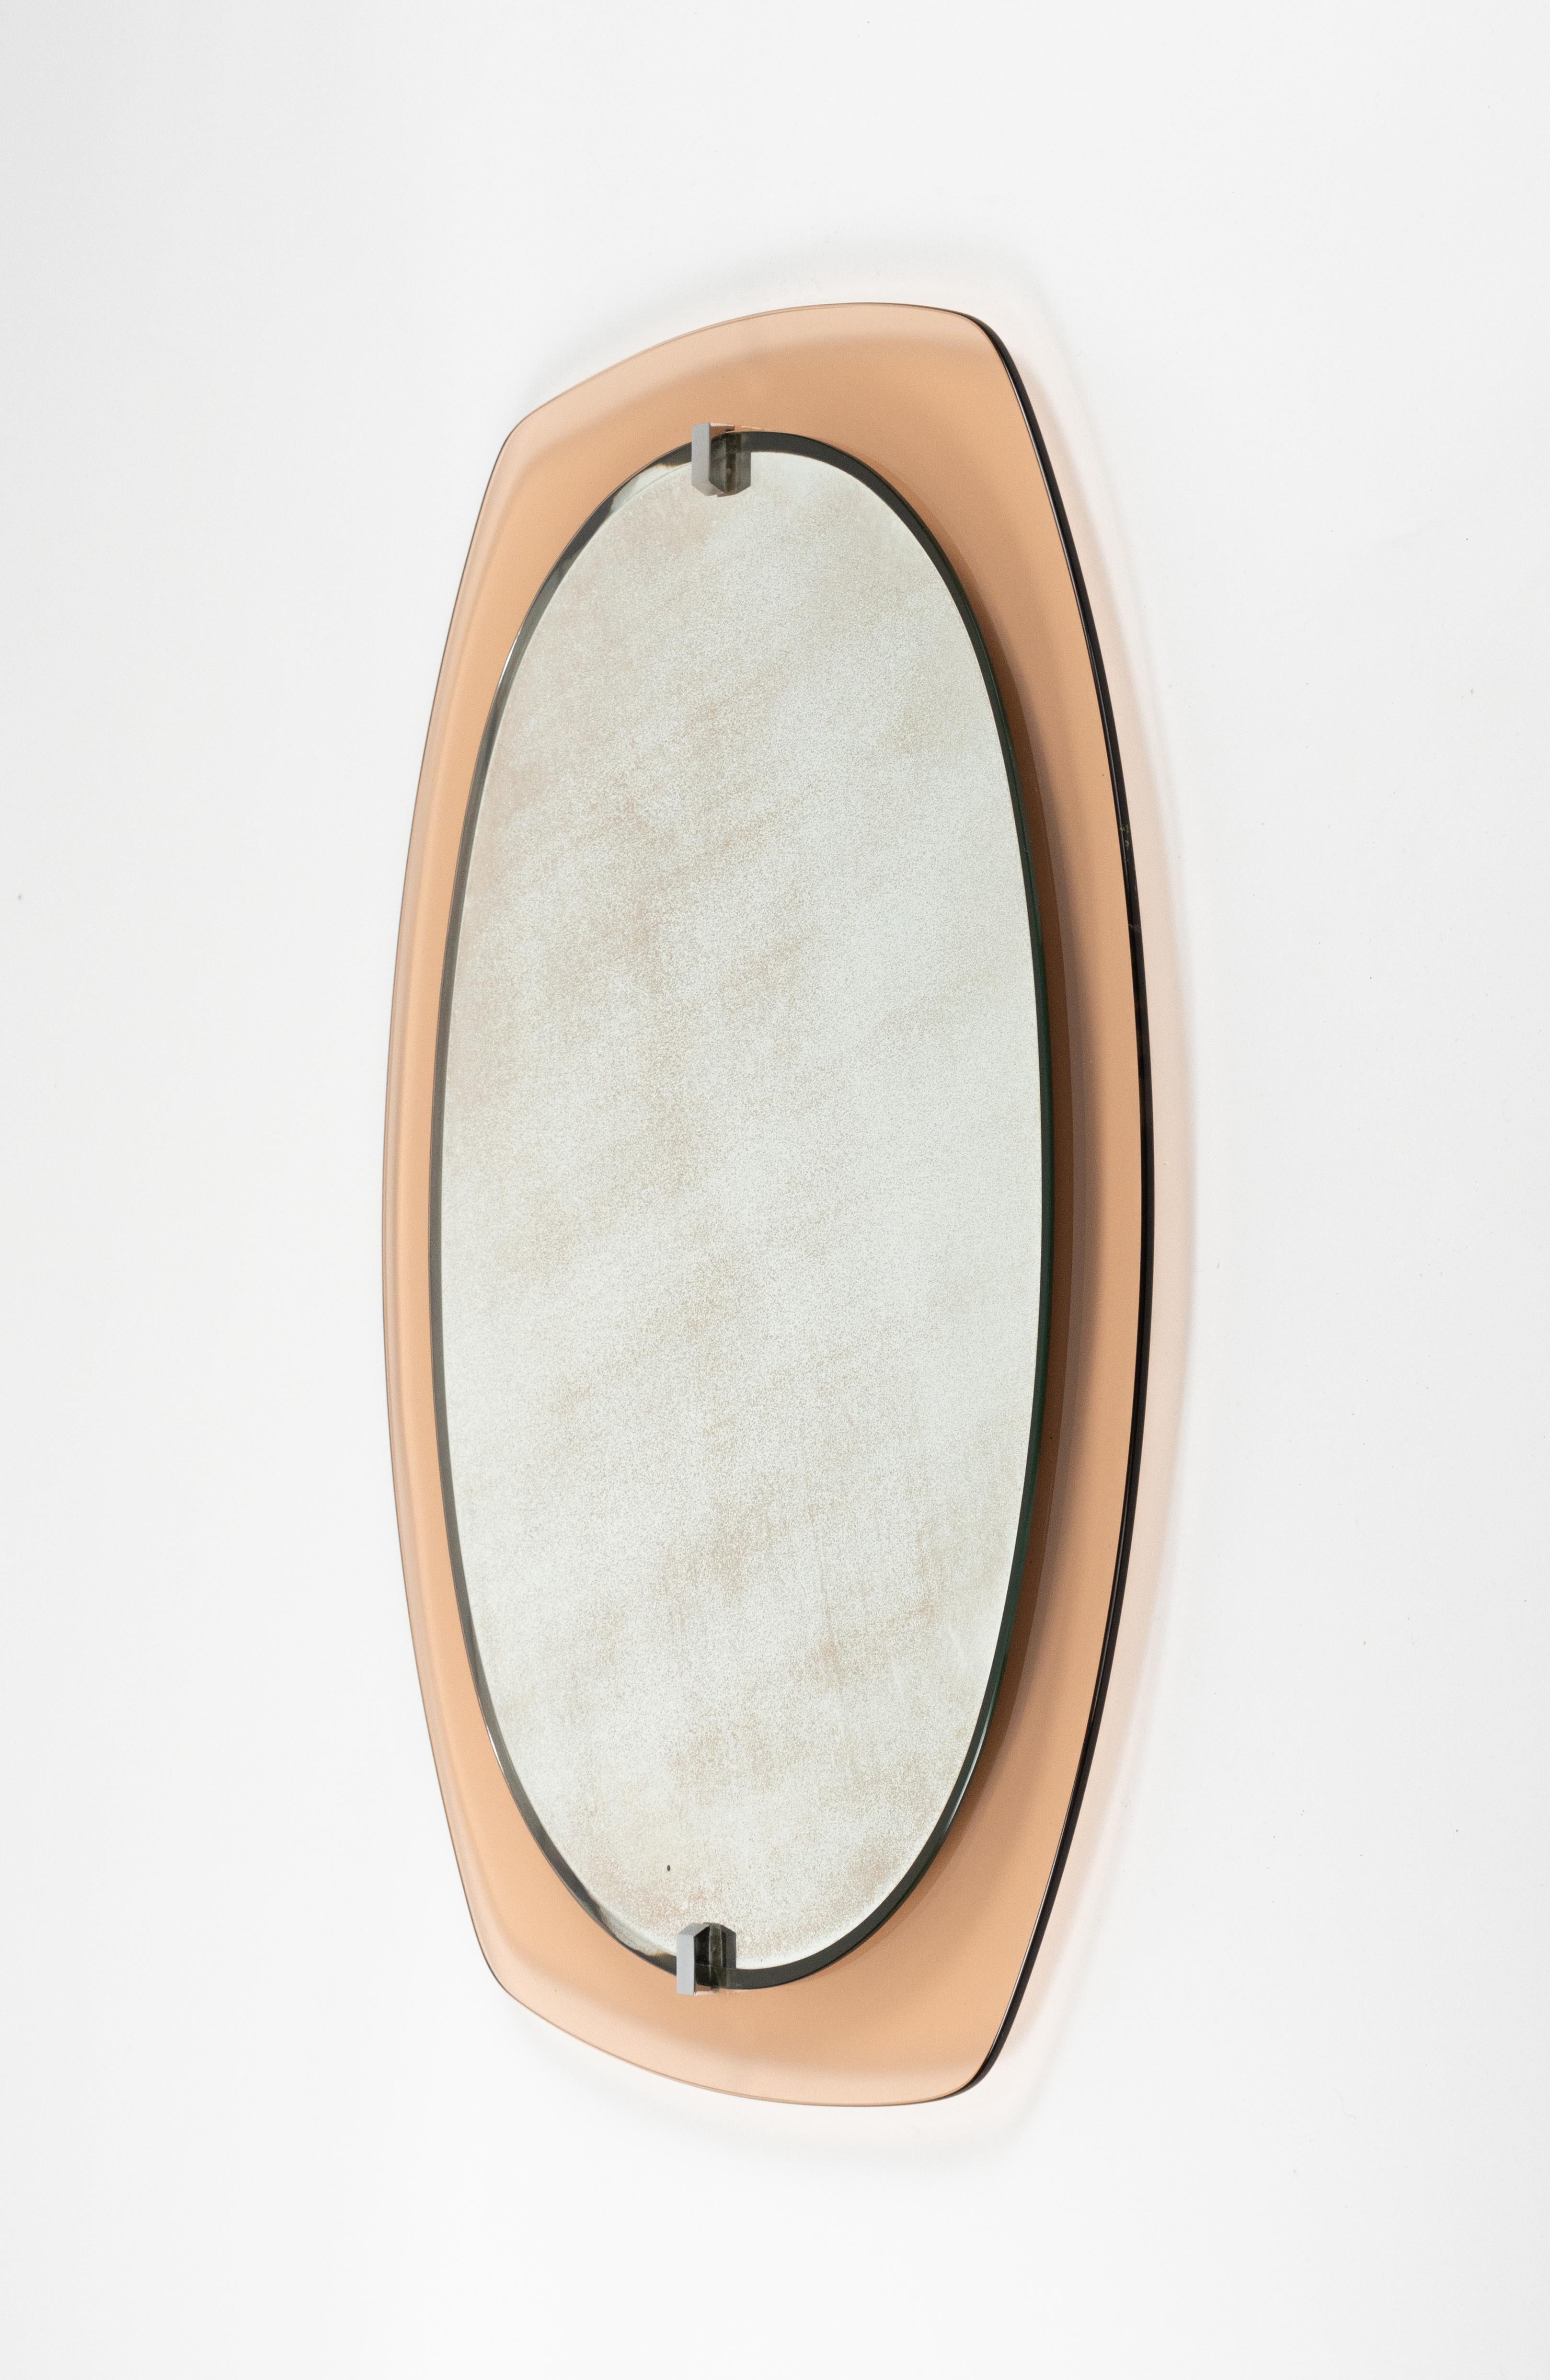 Midcentury Glass Pink Oval Wall Mirror by Veca, Italy 1970s For Sale 7